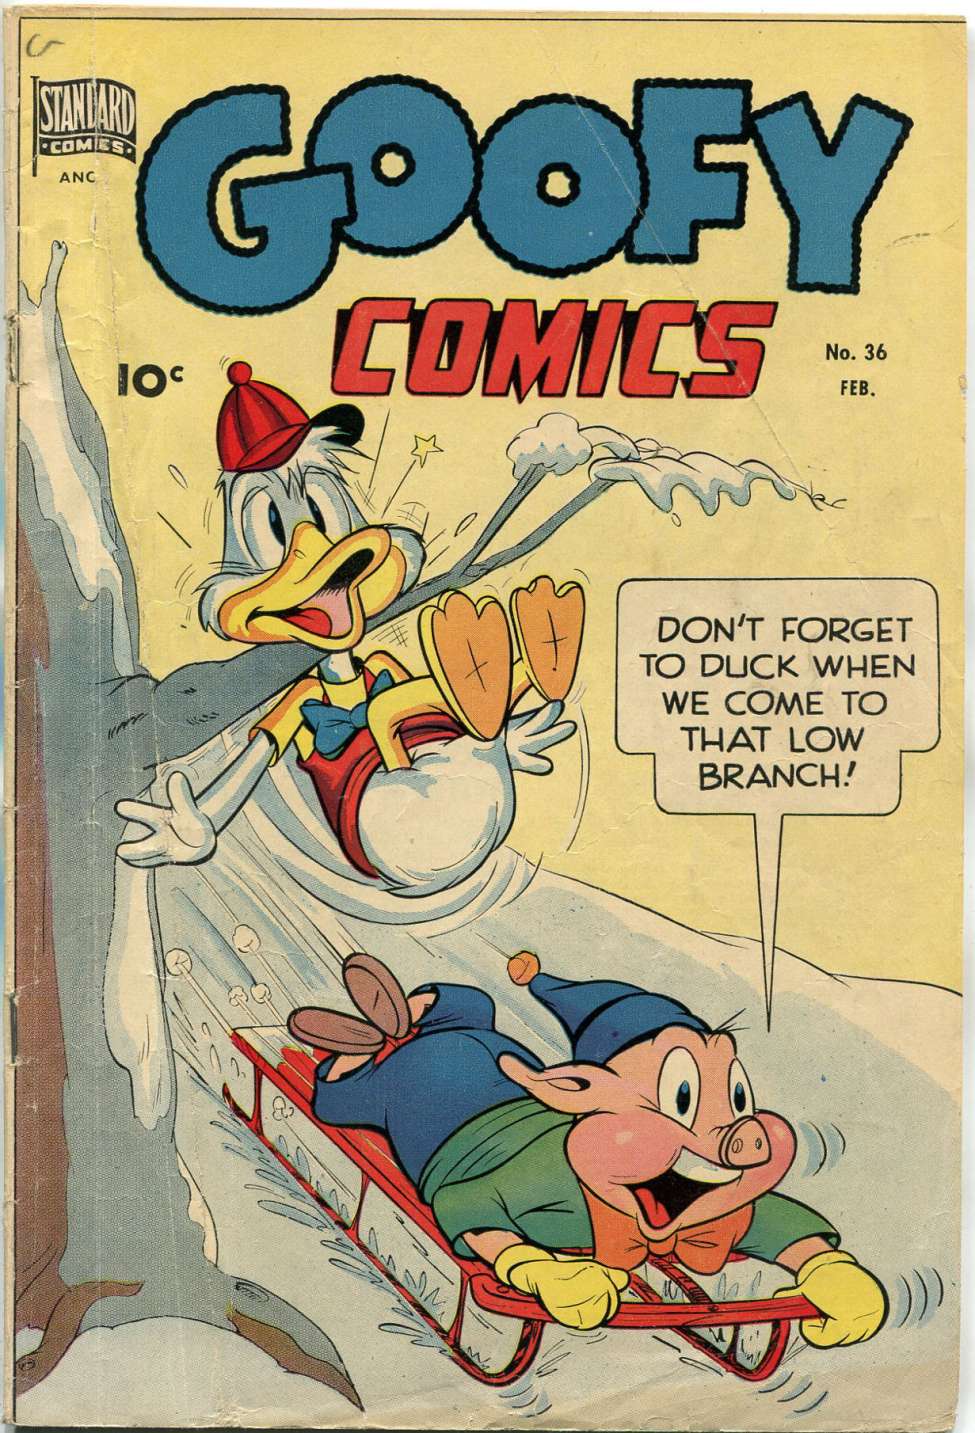 Book Cover For Goofy Comics 36